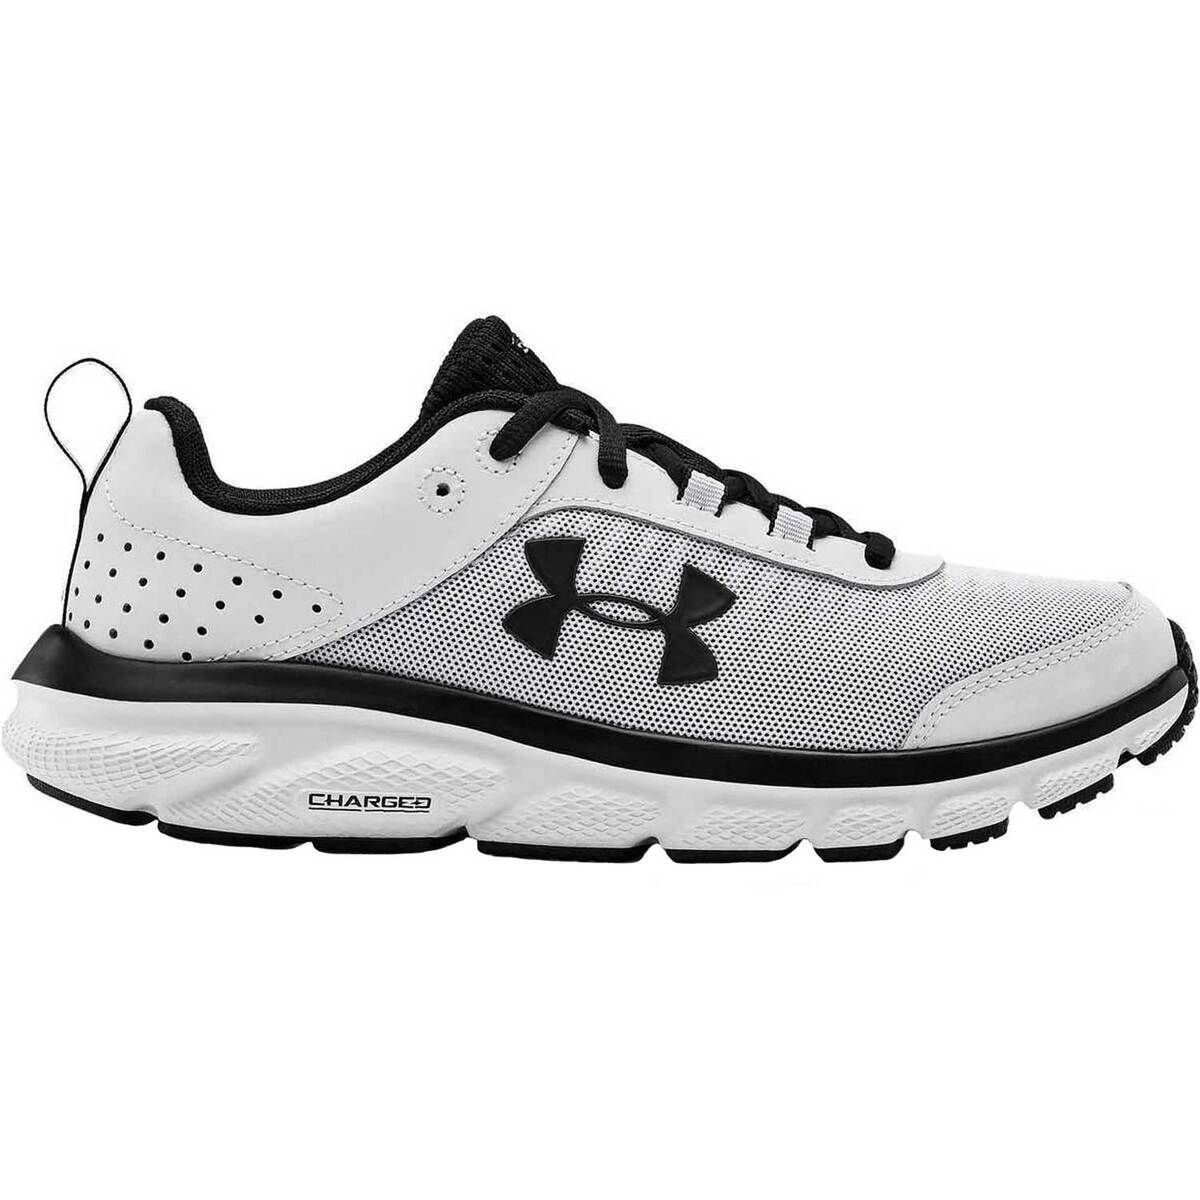 Under Armour Women's Charged Assert 8 Running Shoes - White - Size 8 ...